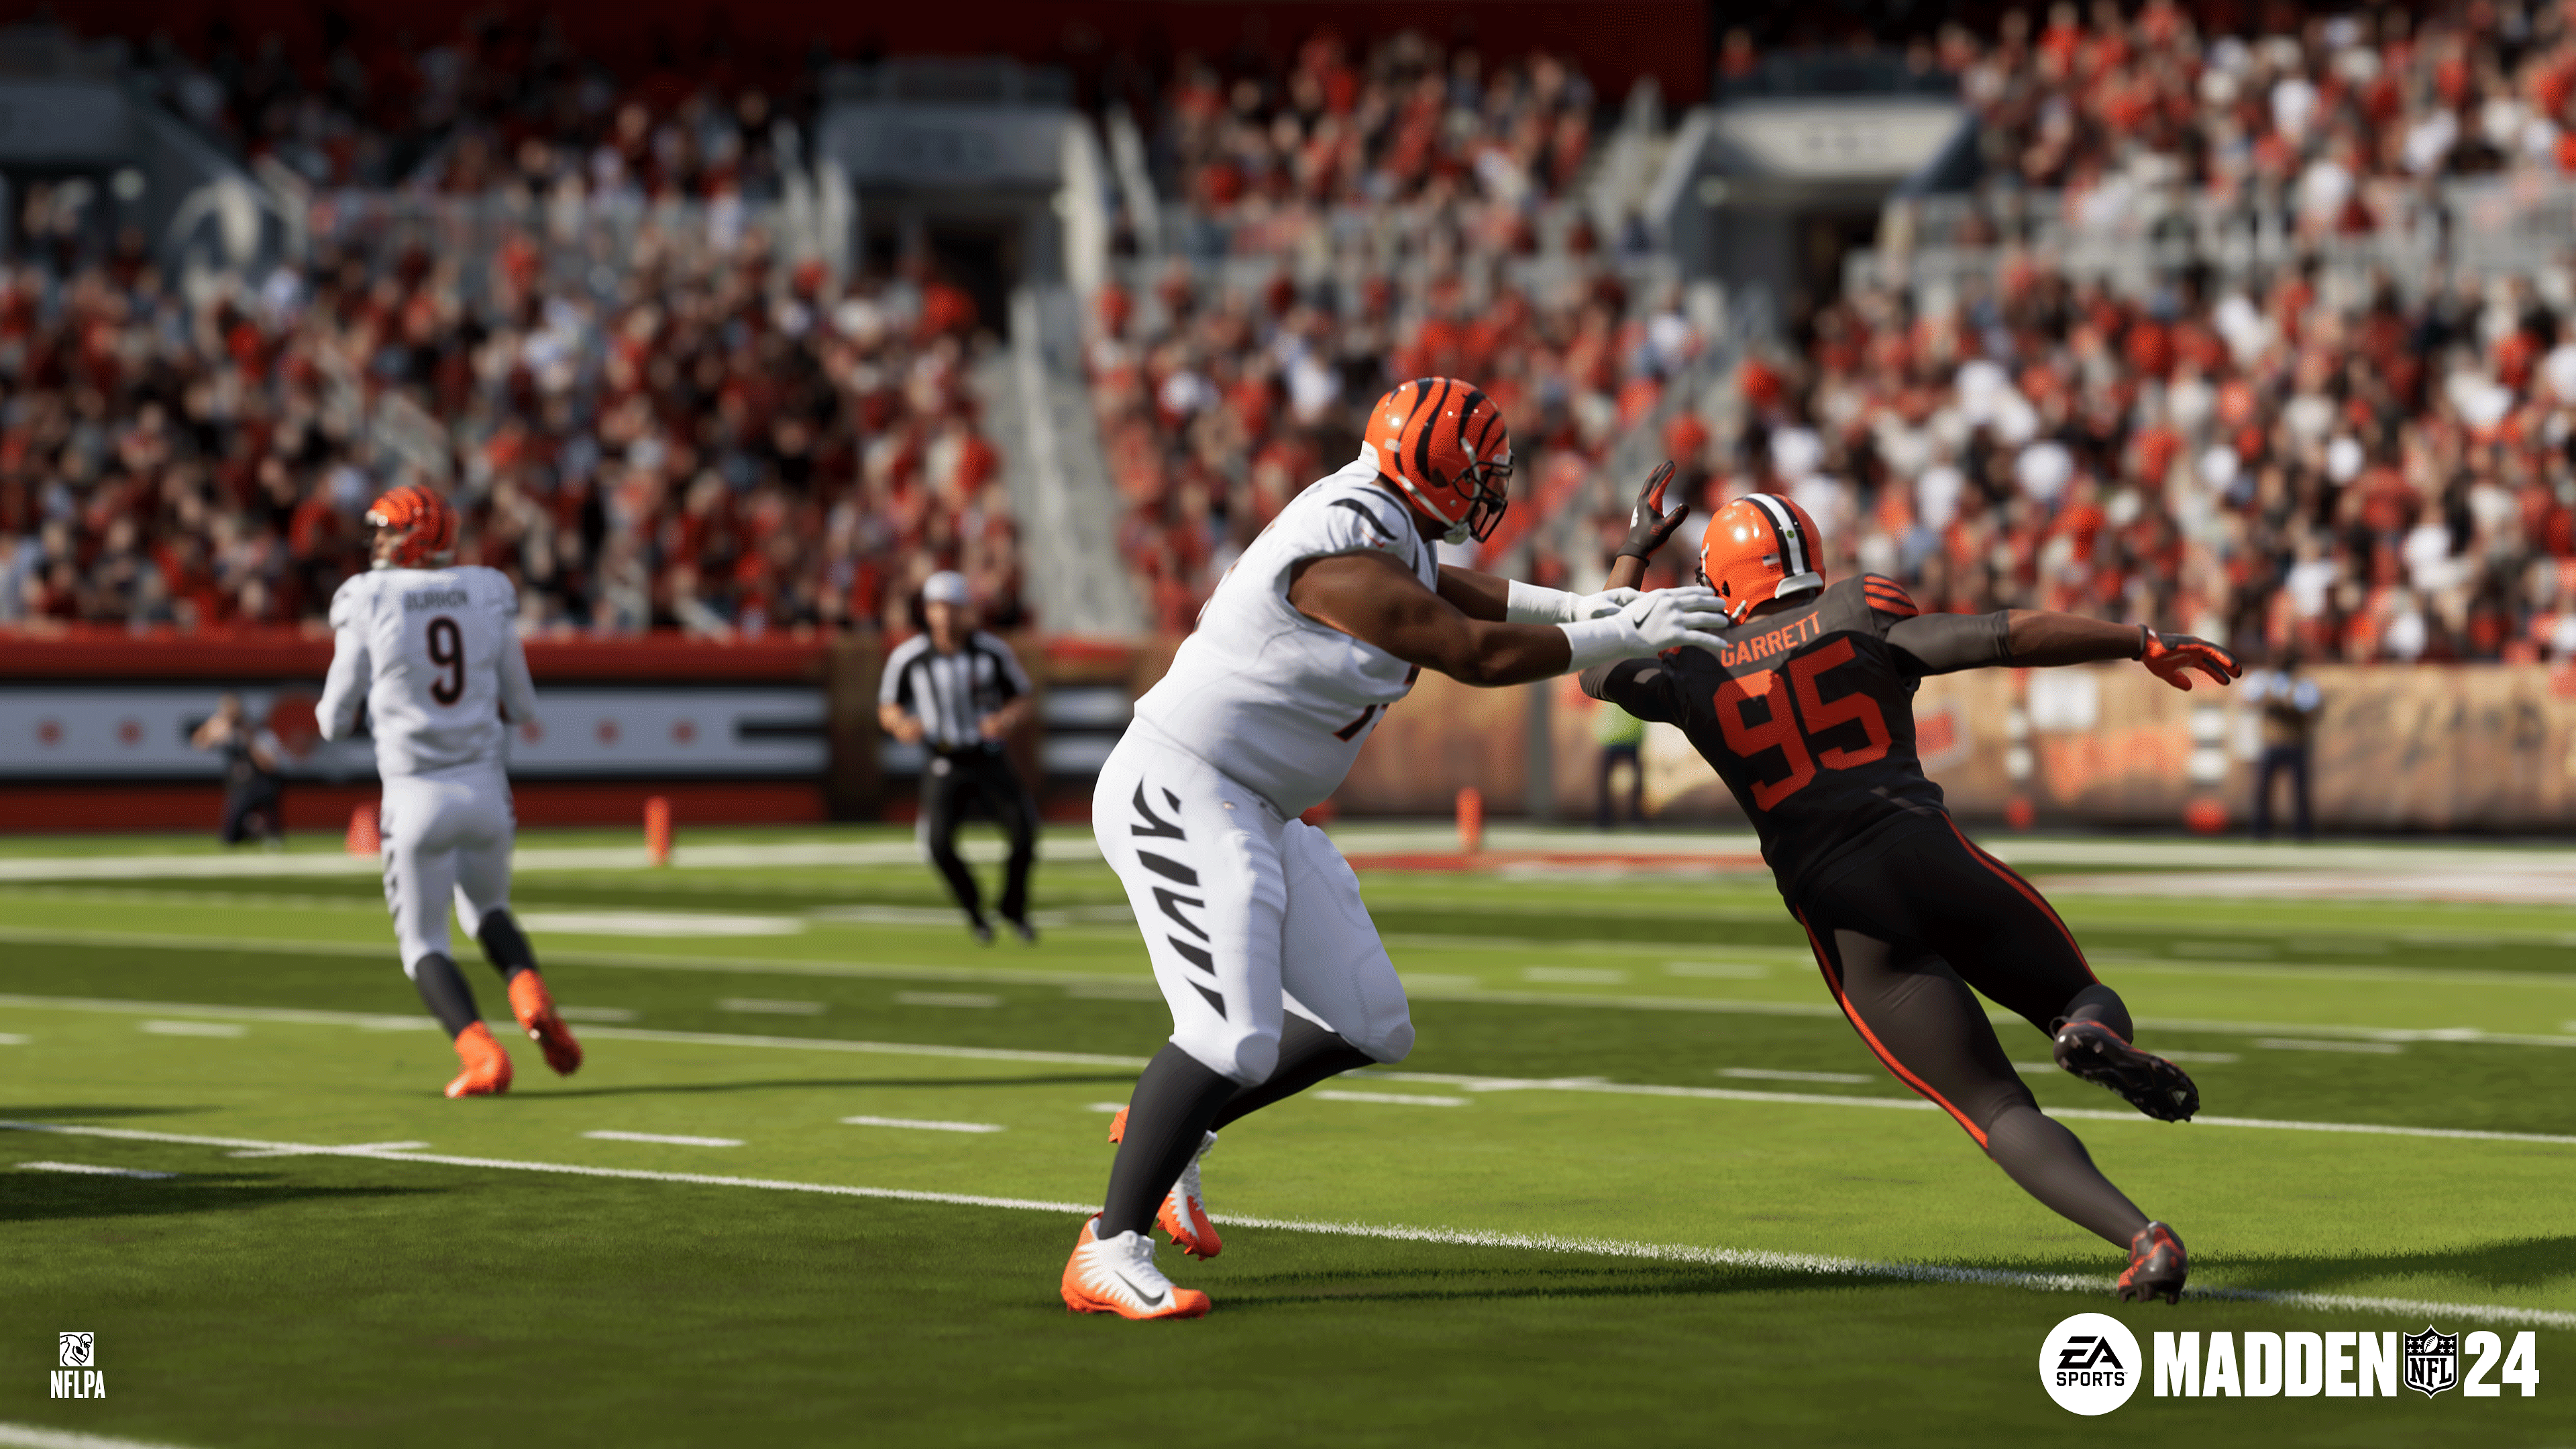 Madden NFL 24: Release date, pre-order, features and more - The SportsRush